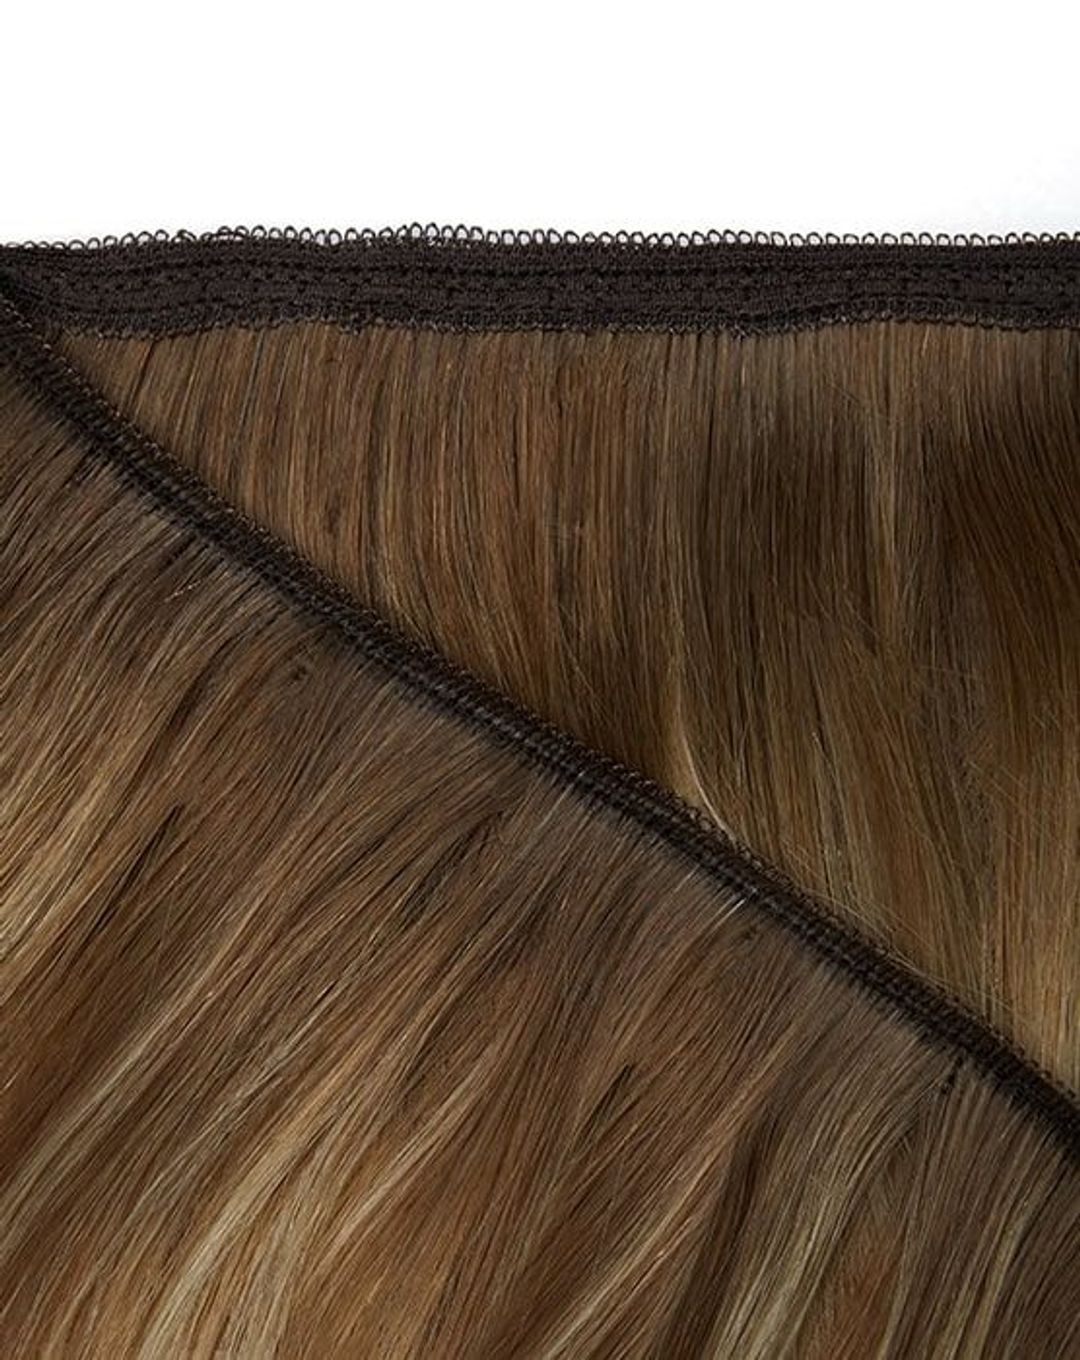 Beauty Works Gold Double Weft Extensions - Raven,22"